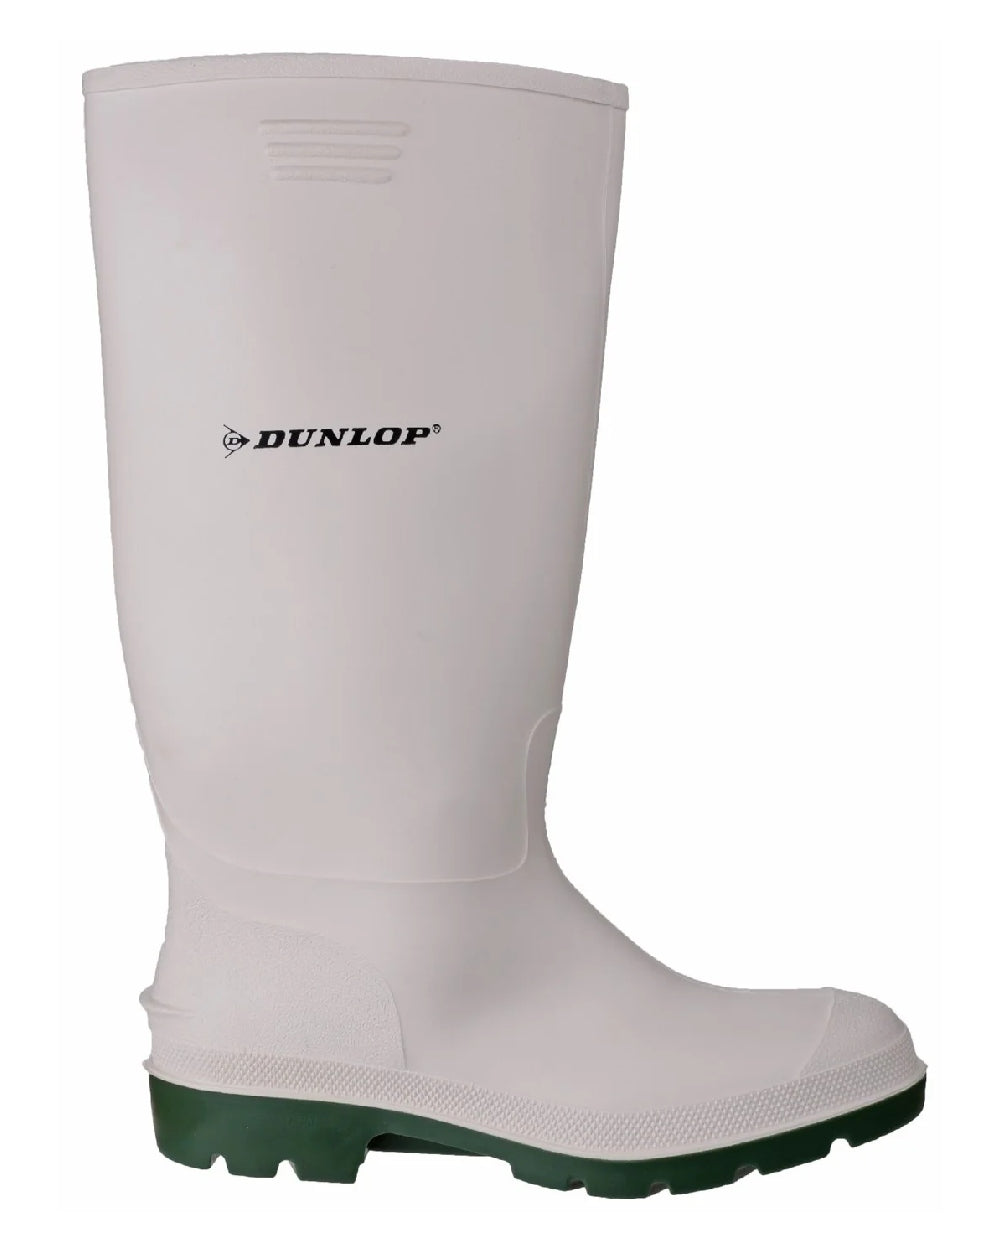 White/Green coloured Dunlop Pricemastor Wellingtons on blurry background 